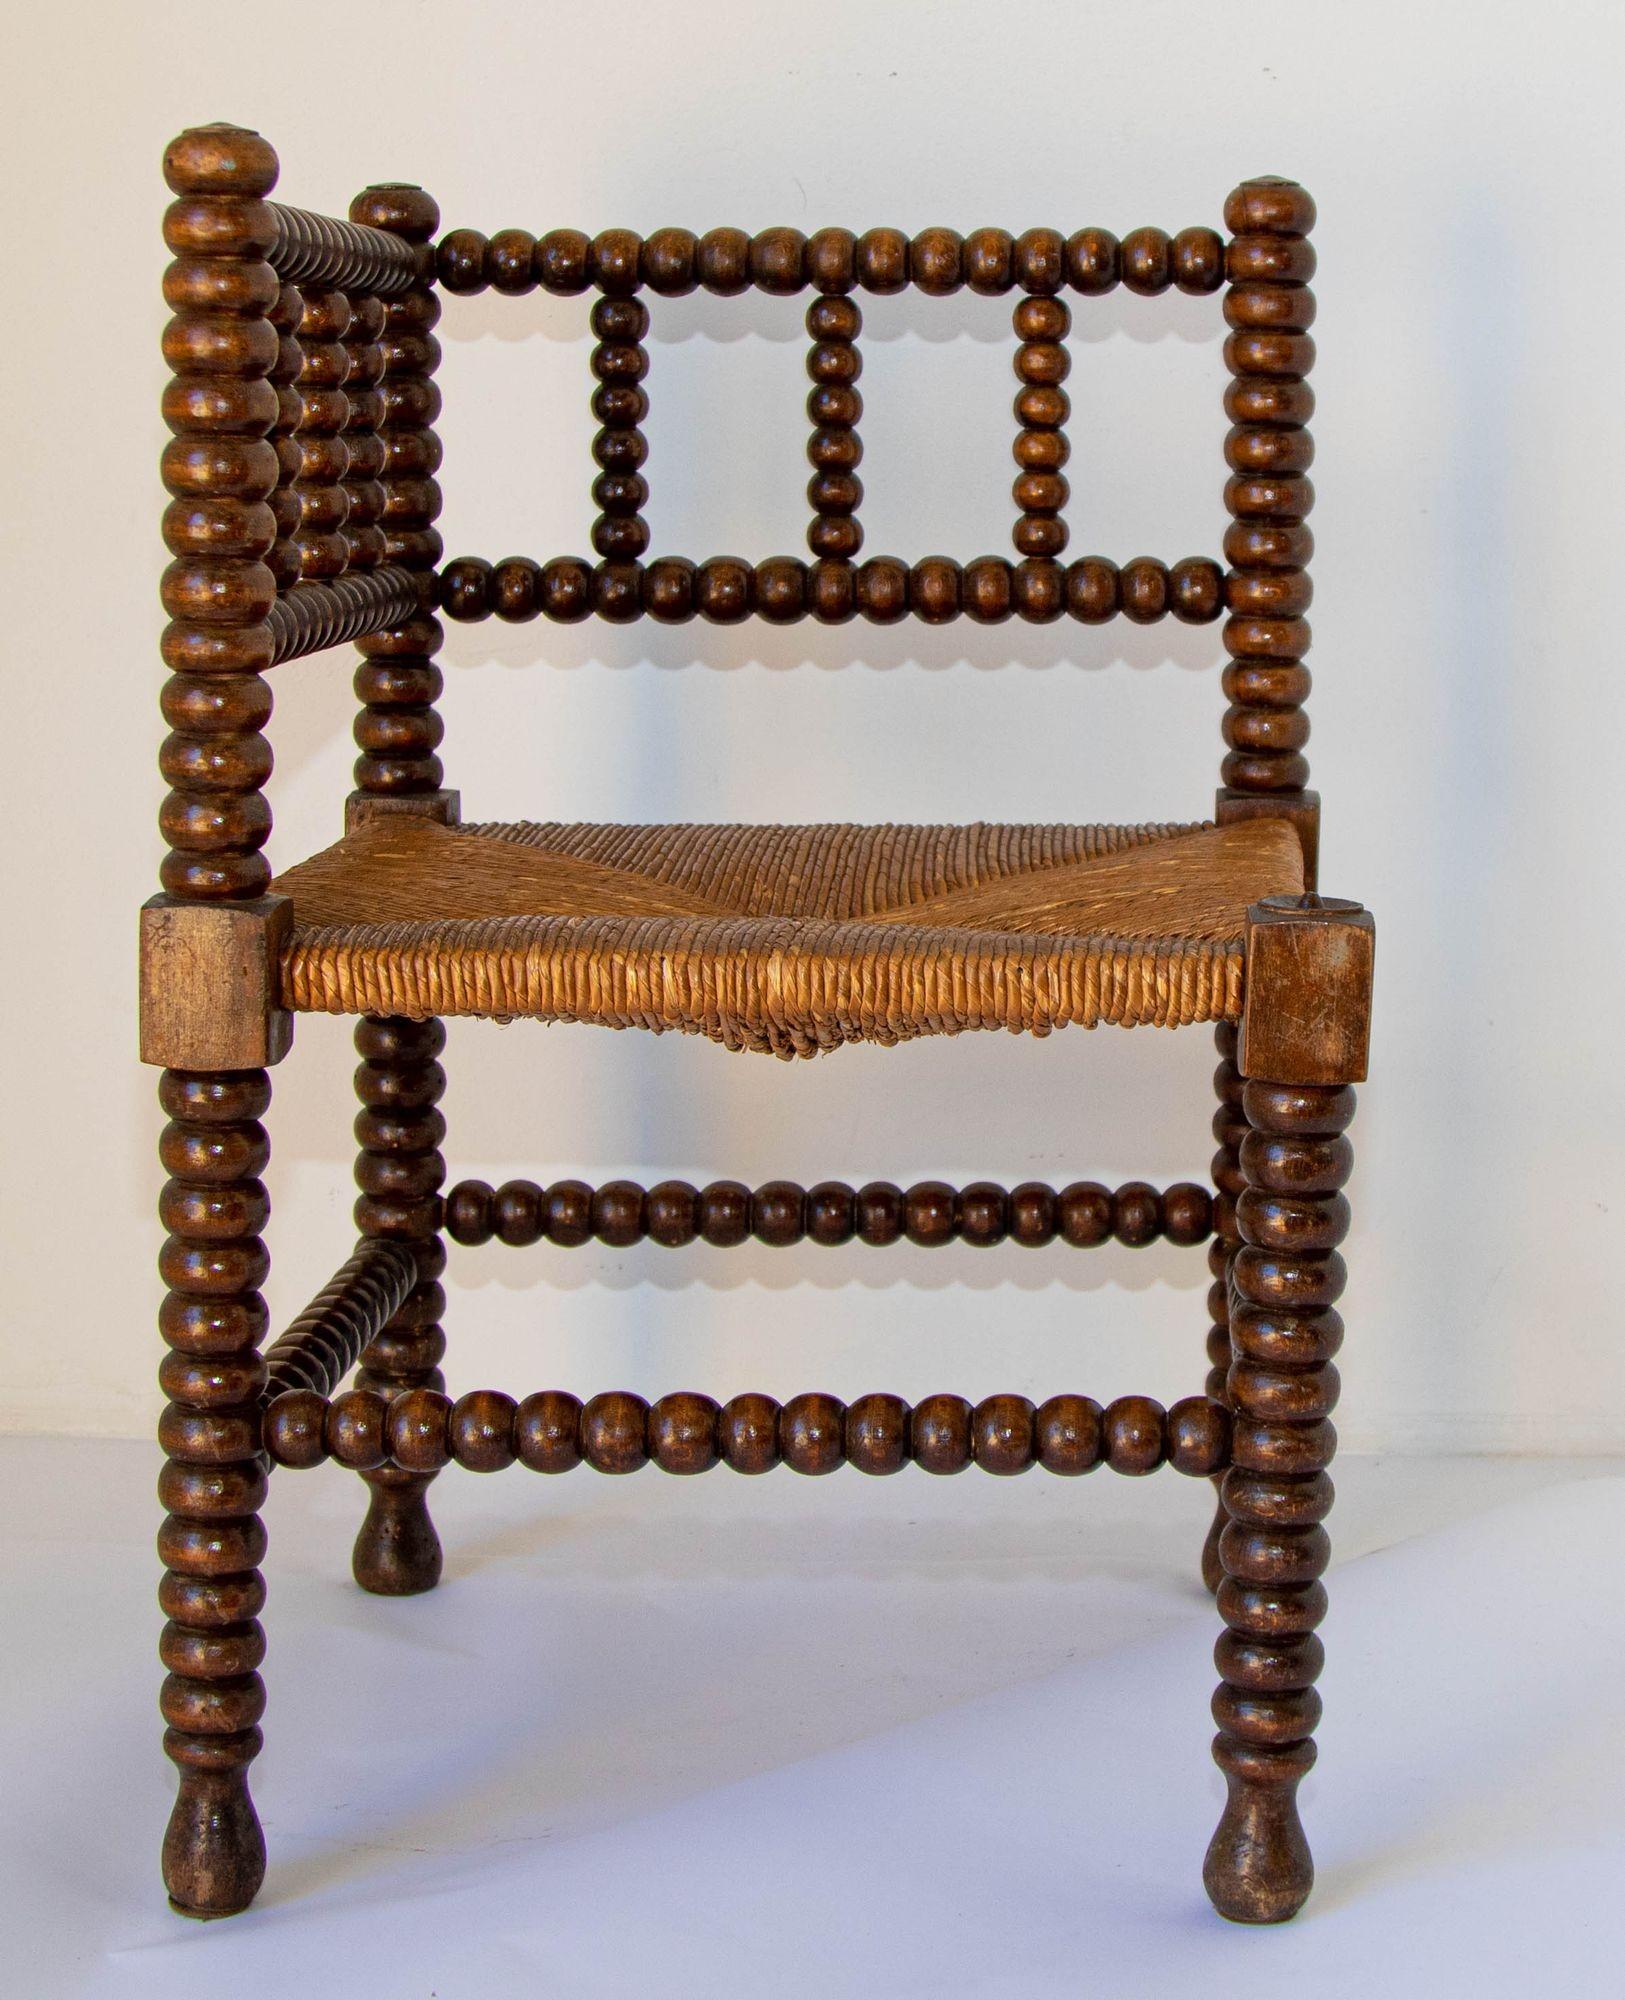 Antique 19th c. French Bobbin rush corner chair.
French rush-seat corner chair, Coin du Feu.
19th Century French Provincial-style carved oak armchair with open backs and rush seat.
Antique sturdy useable chair, wood stick and ball craftsmanship